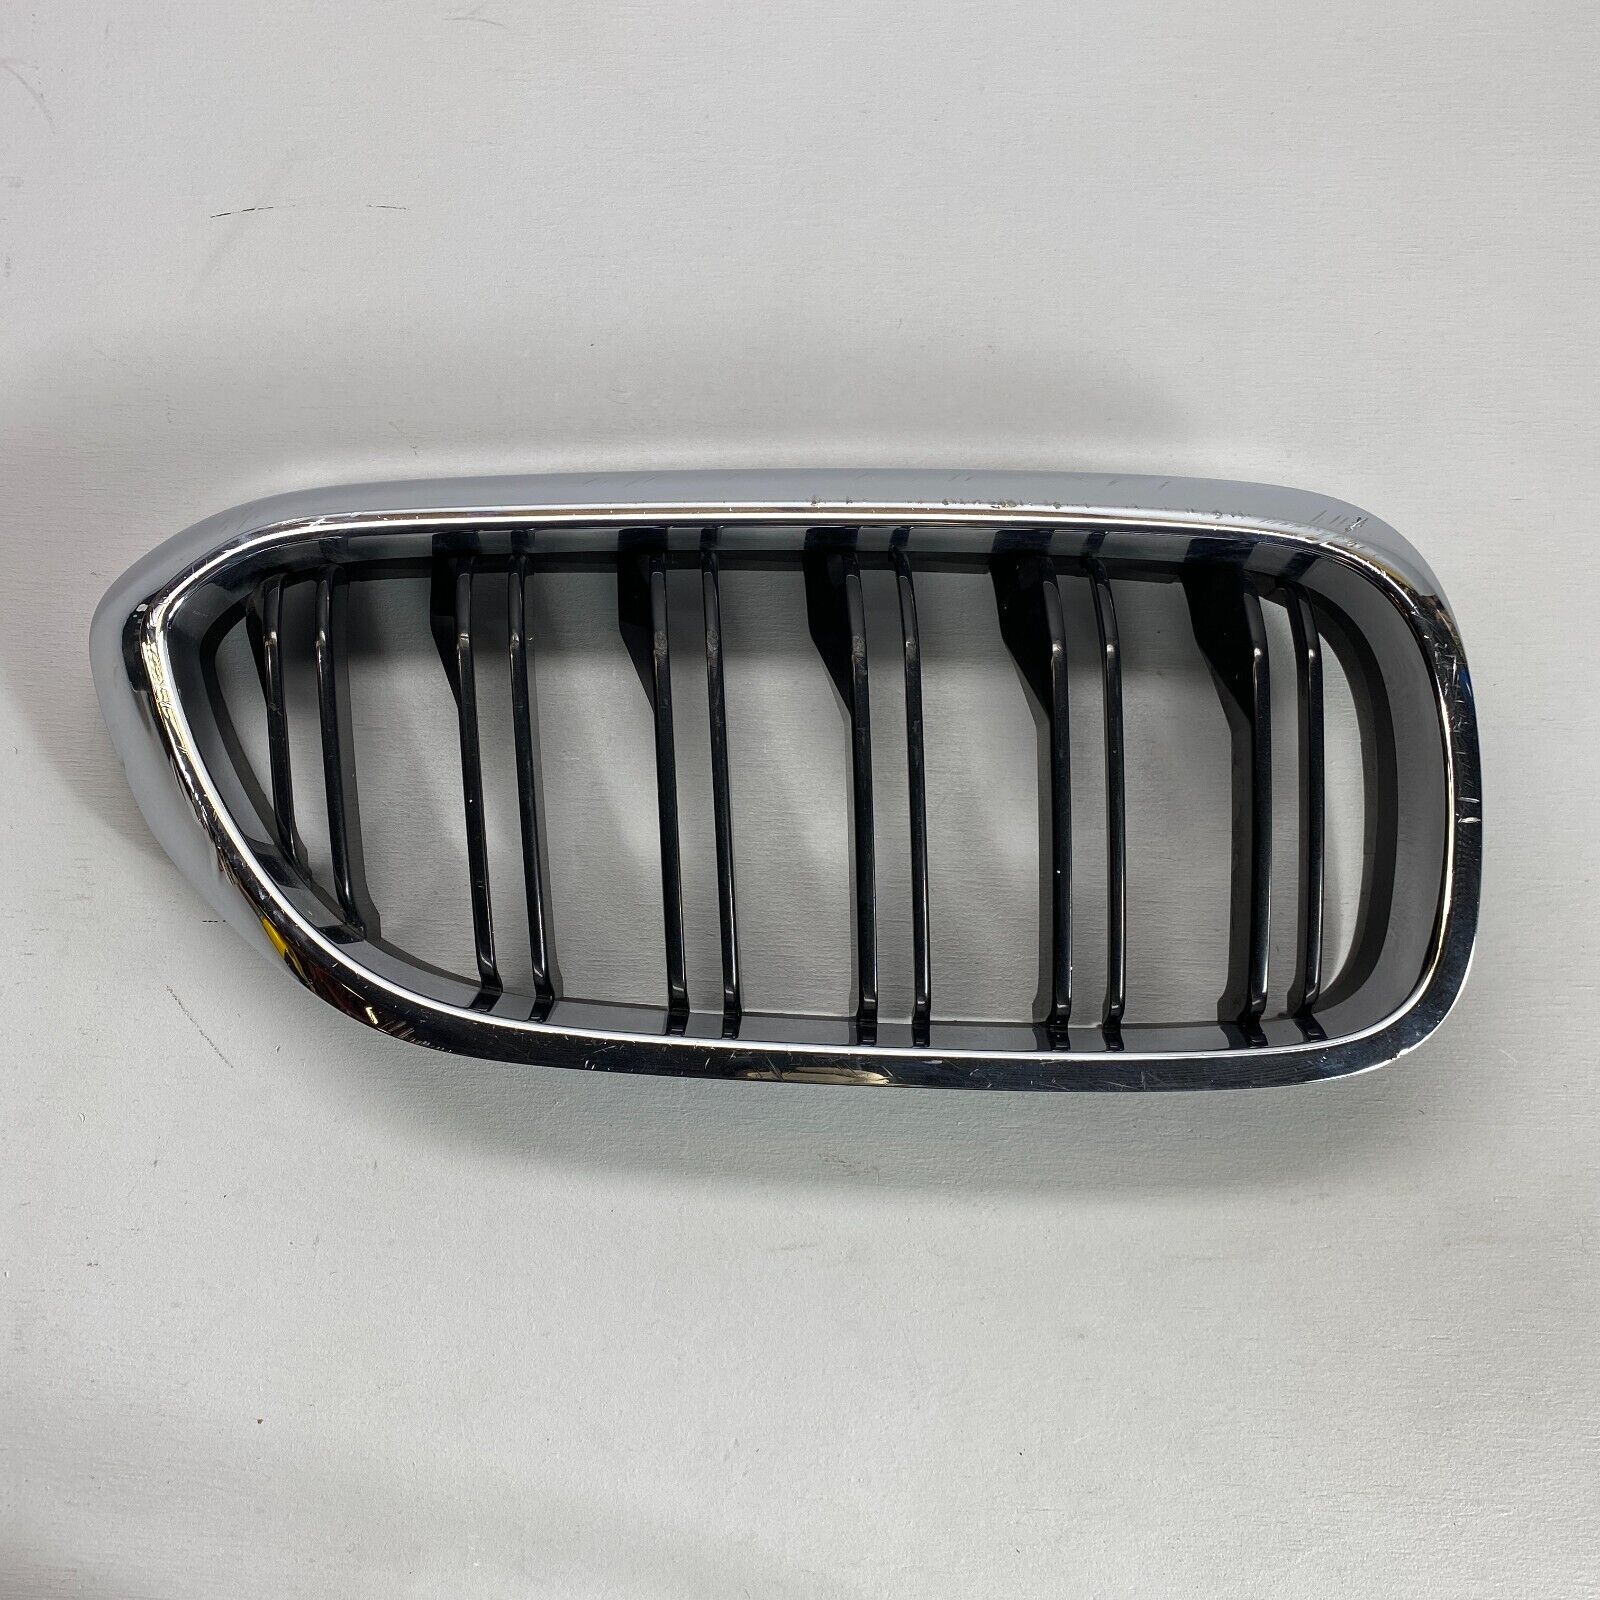 2018-2023 BMW M5 F90 FRONT FRONT RIGHT KIDNEY GRILLE 8063174 616979-10 OEM